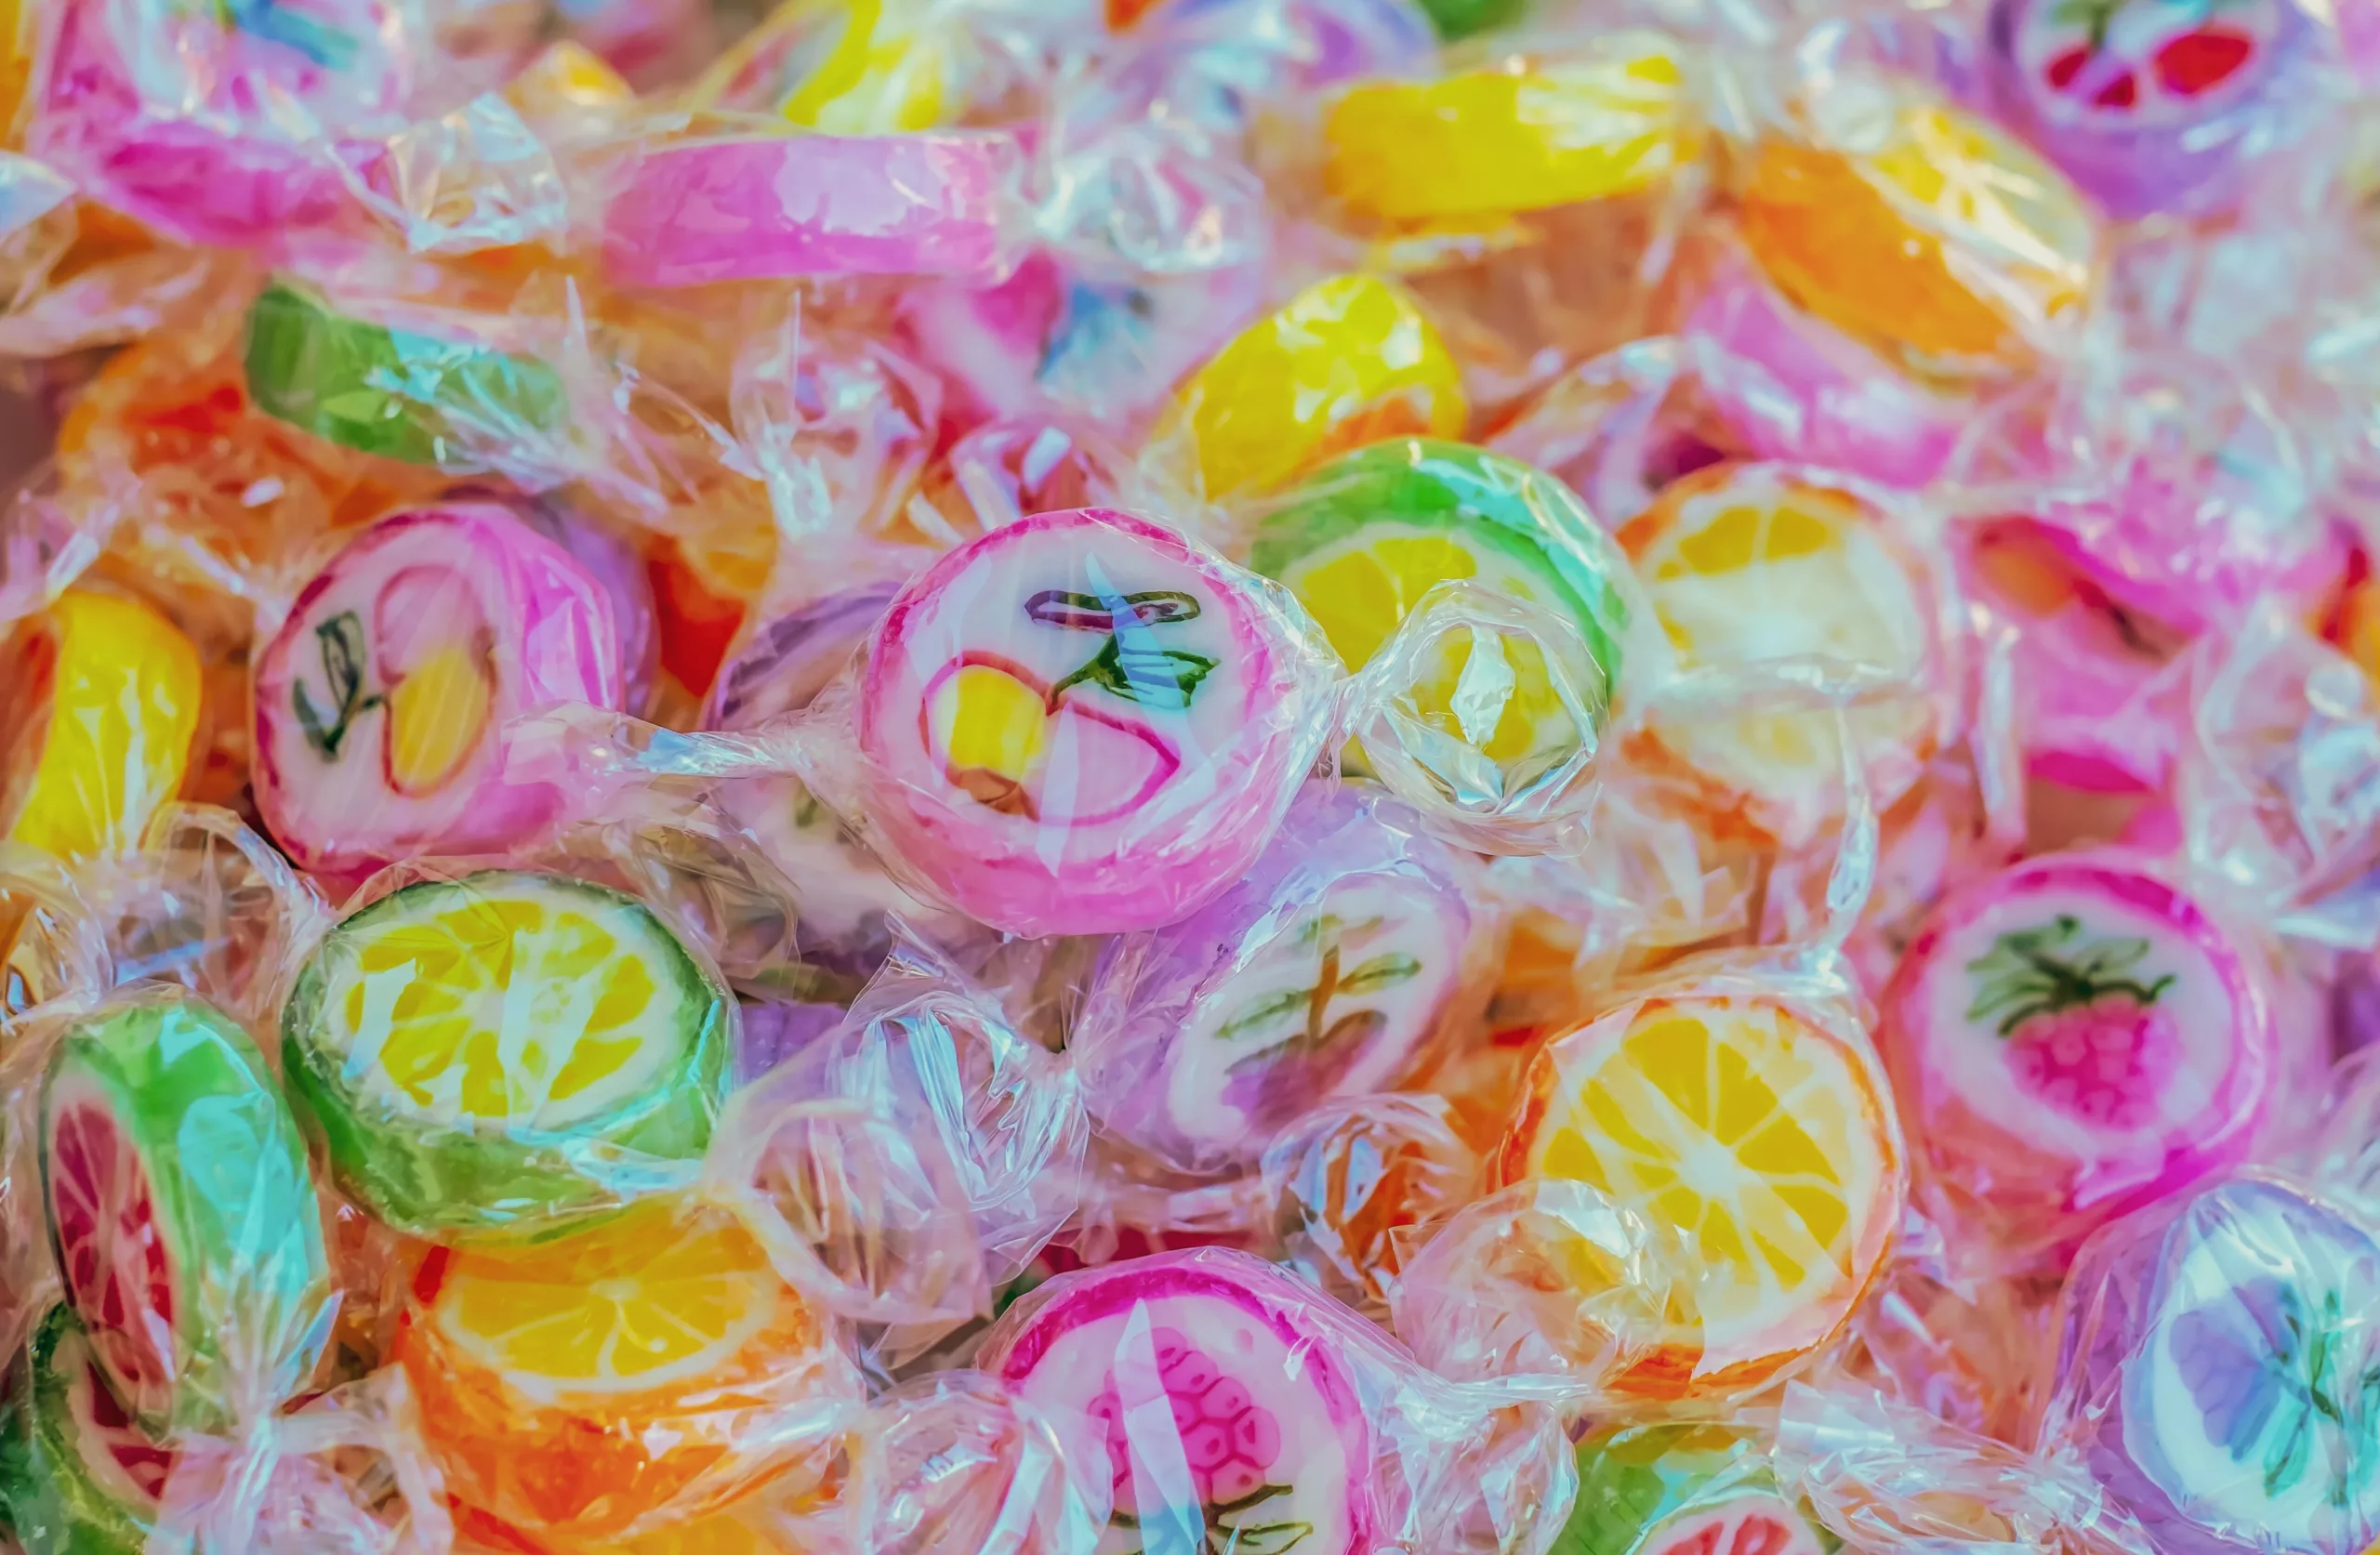 Satisfy your sweet tooth with all-natural organic candies